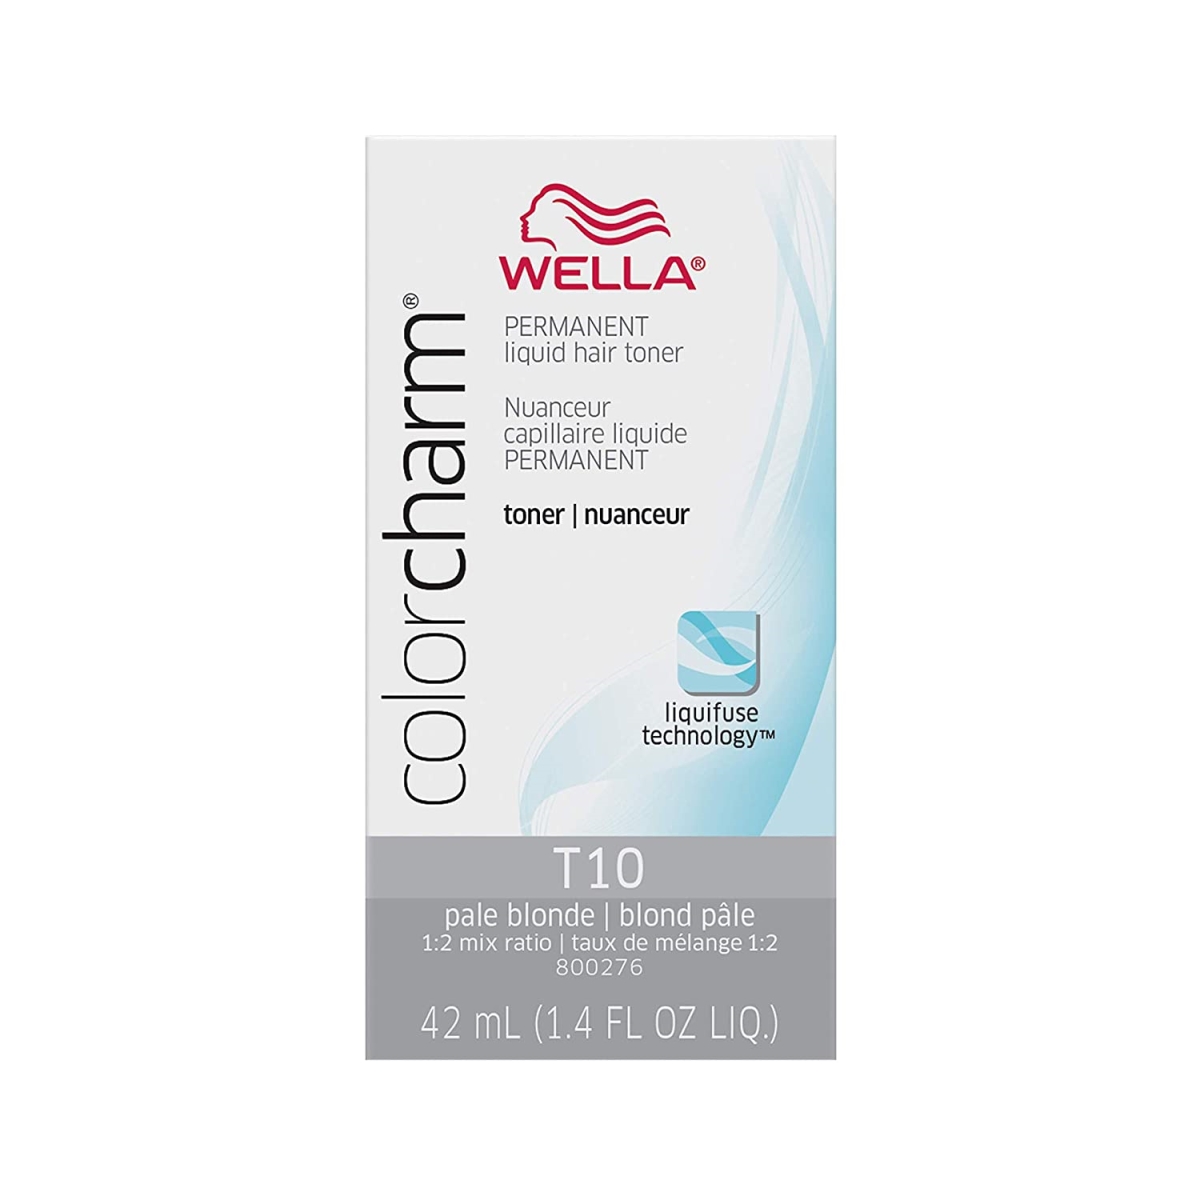 Picture of Wella h4568651 1.4 oz Charm Permanent Liquid Hair Toners for Hair Toning